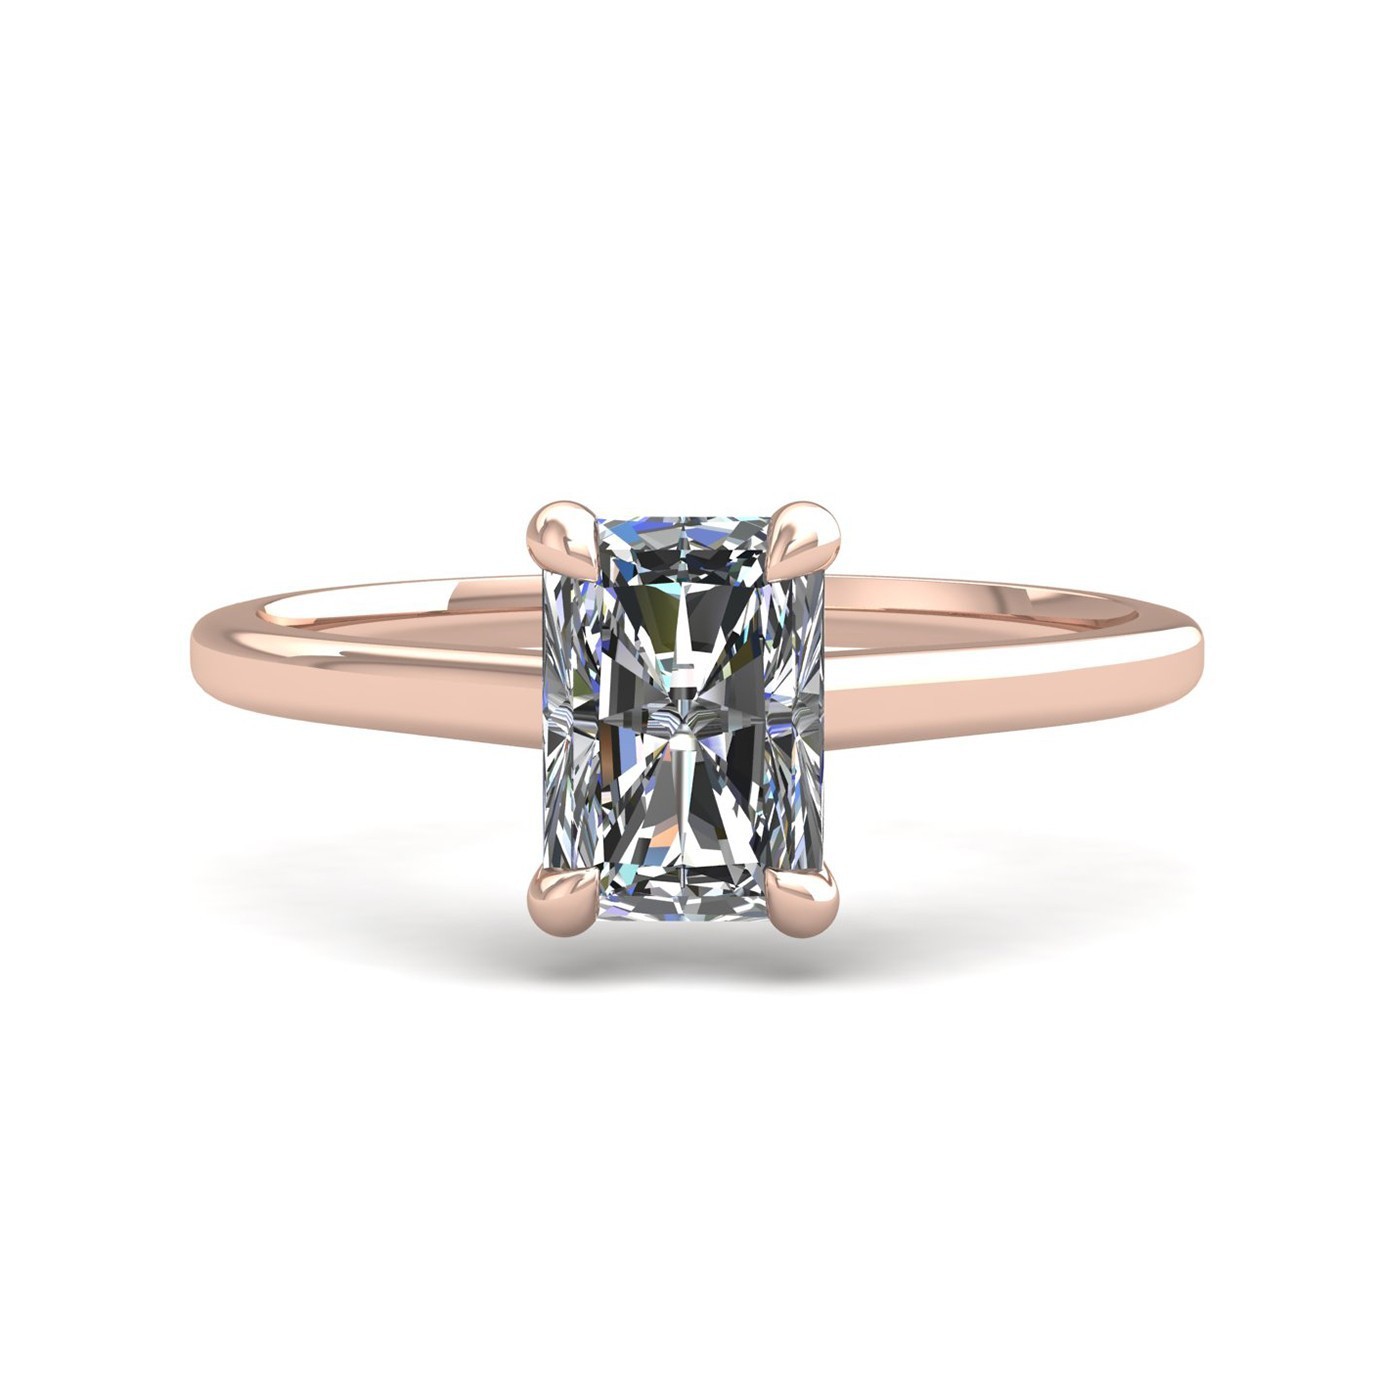 18k rose gold  1,00 ct 4 prongs solitaire radiant cut diamond engagement ring with whisper thin band